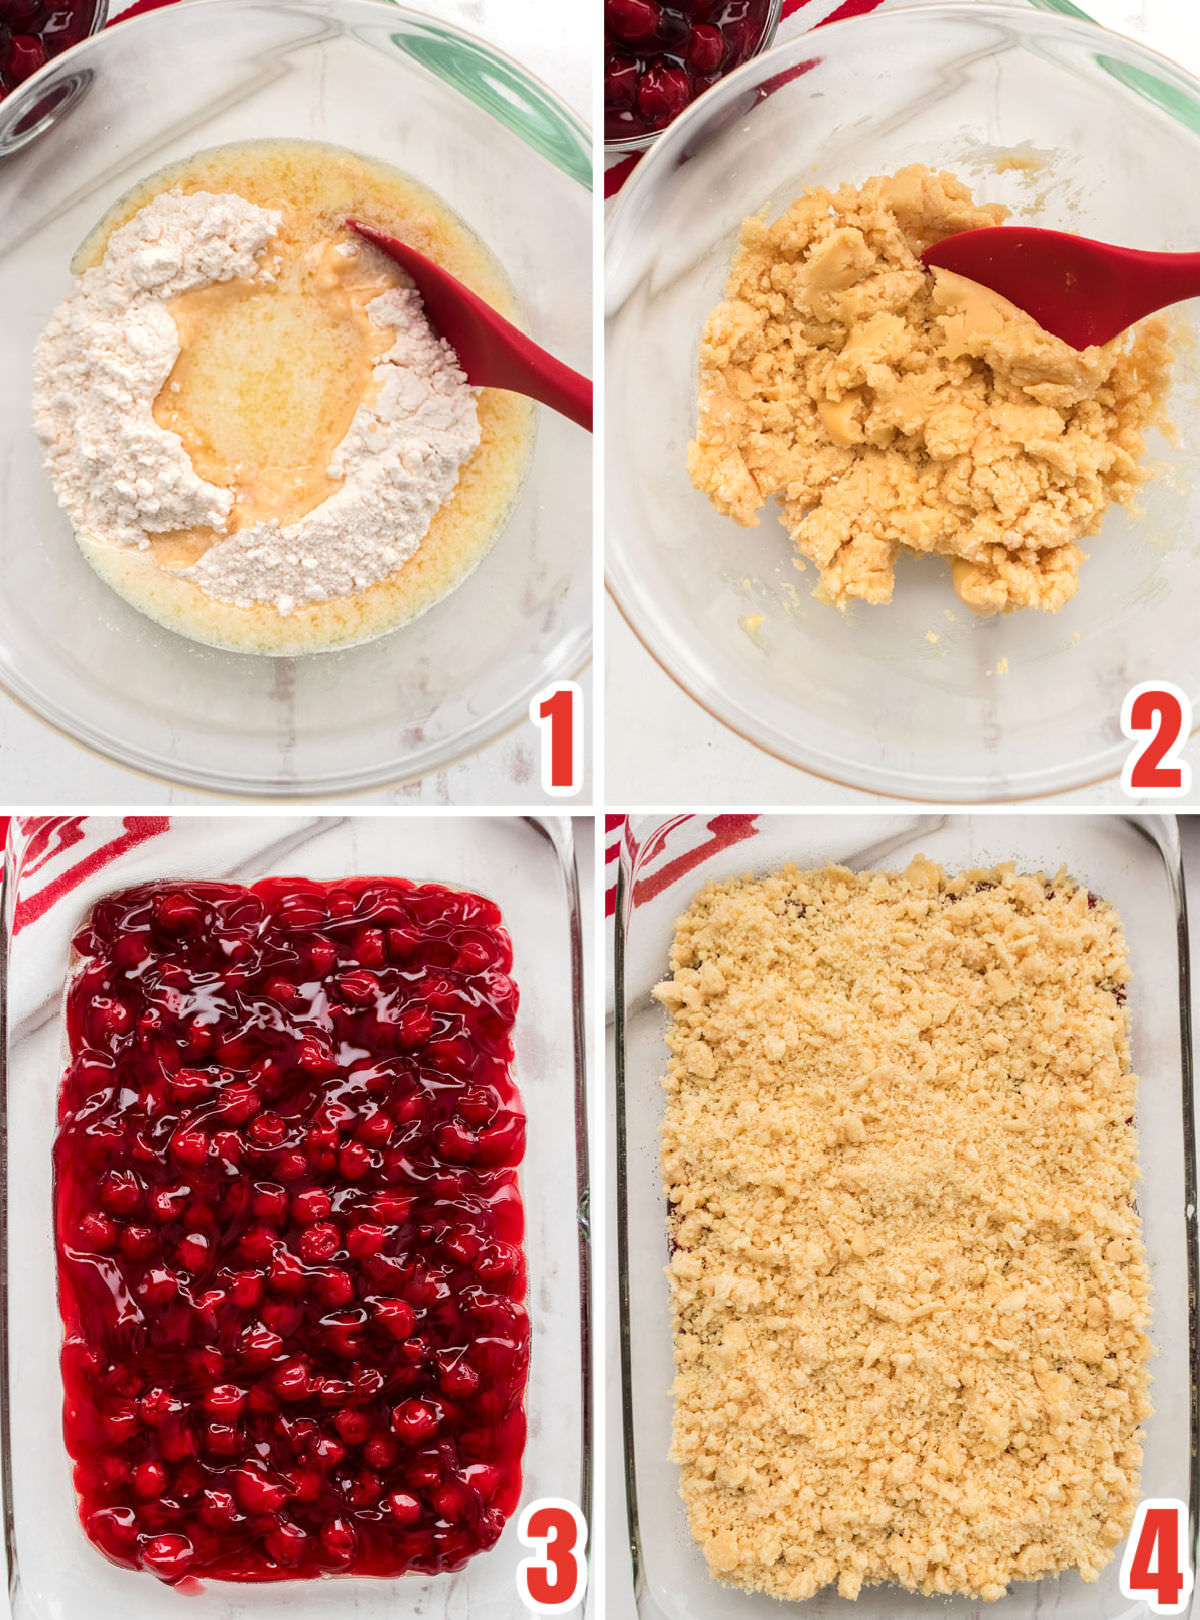 Collage image showing the steps required to make the cherry dessert.